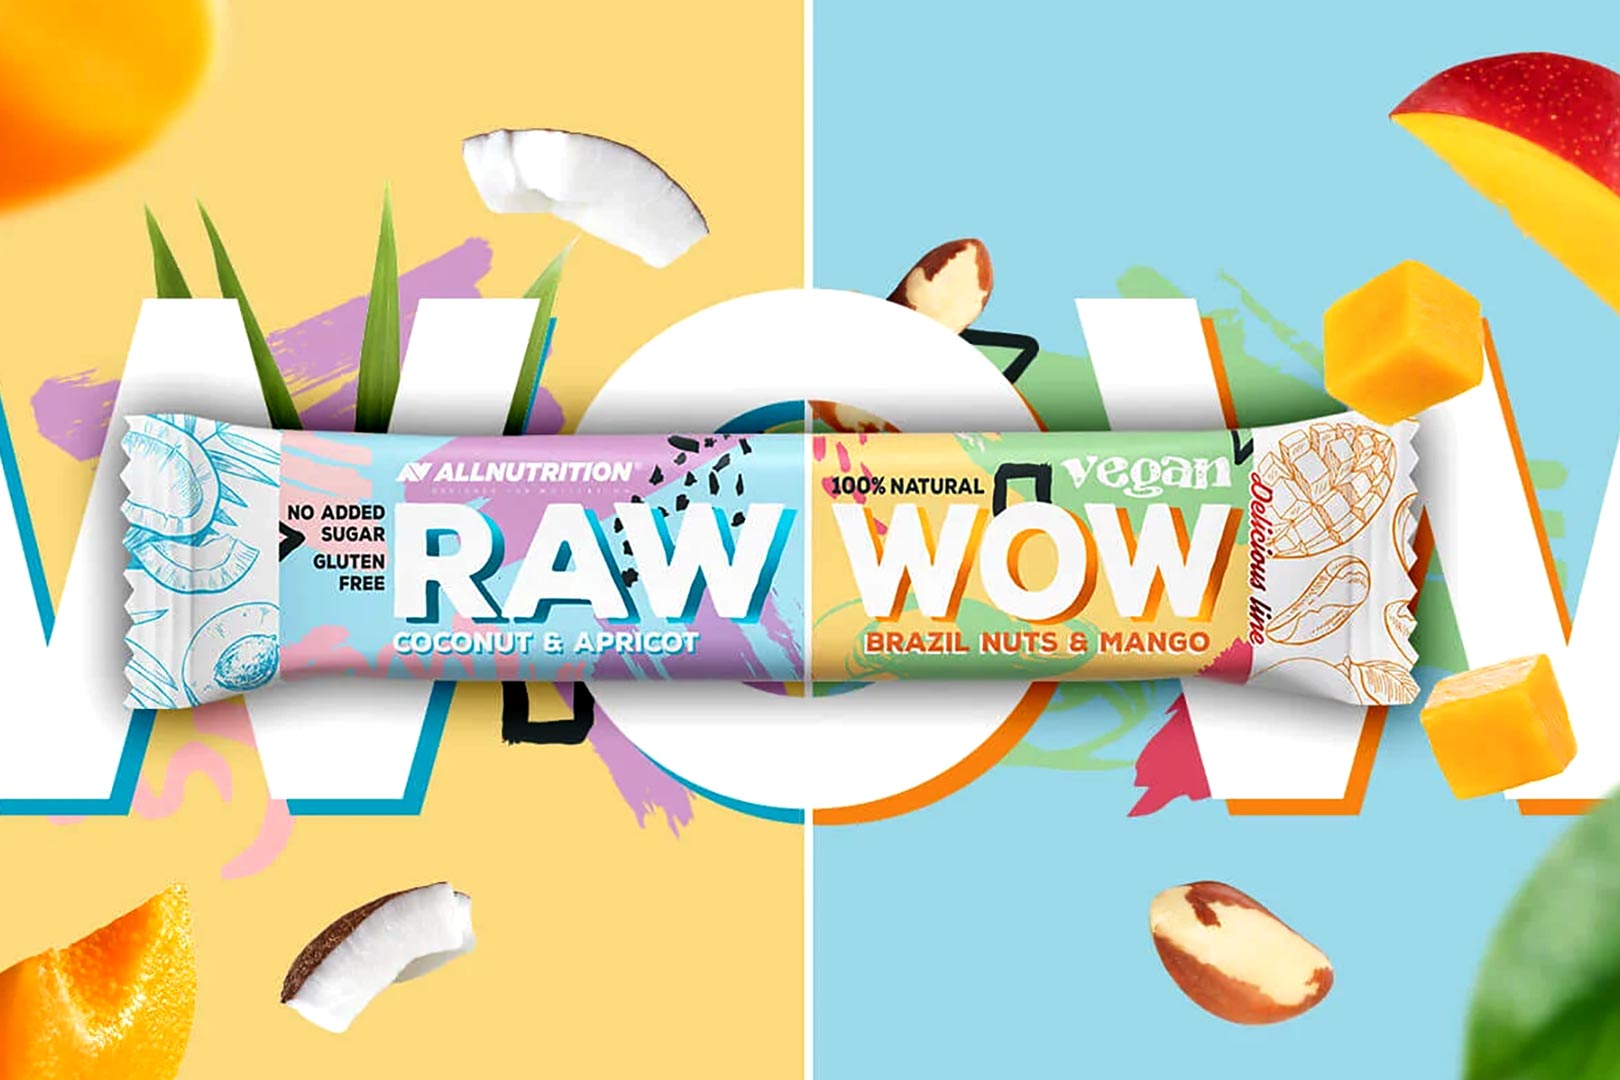 All Nutrition Raw Wow